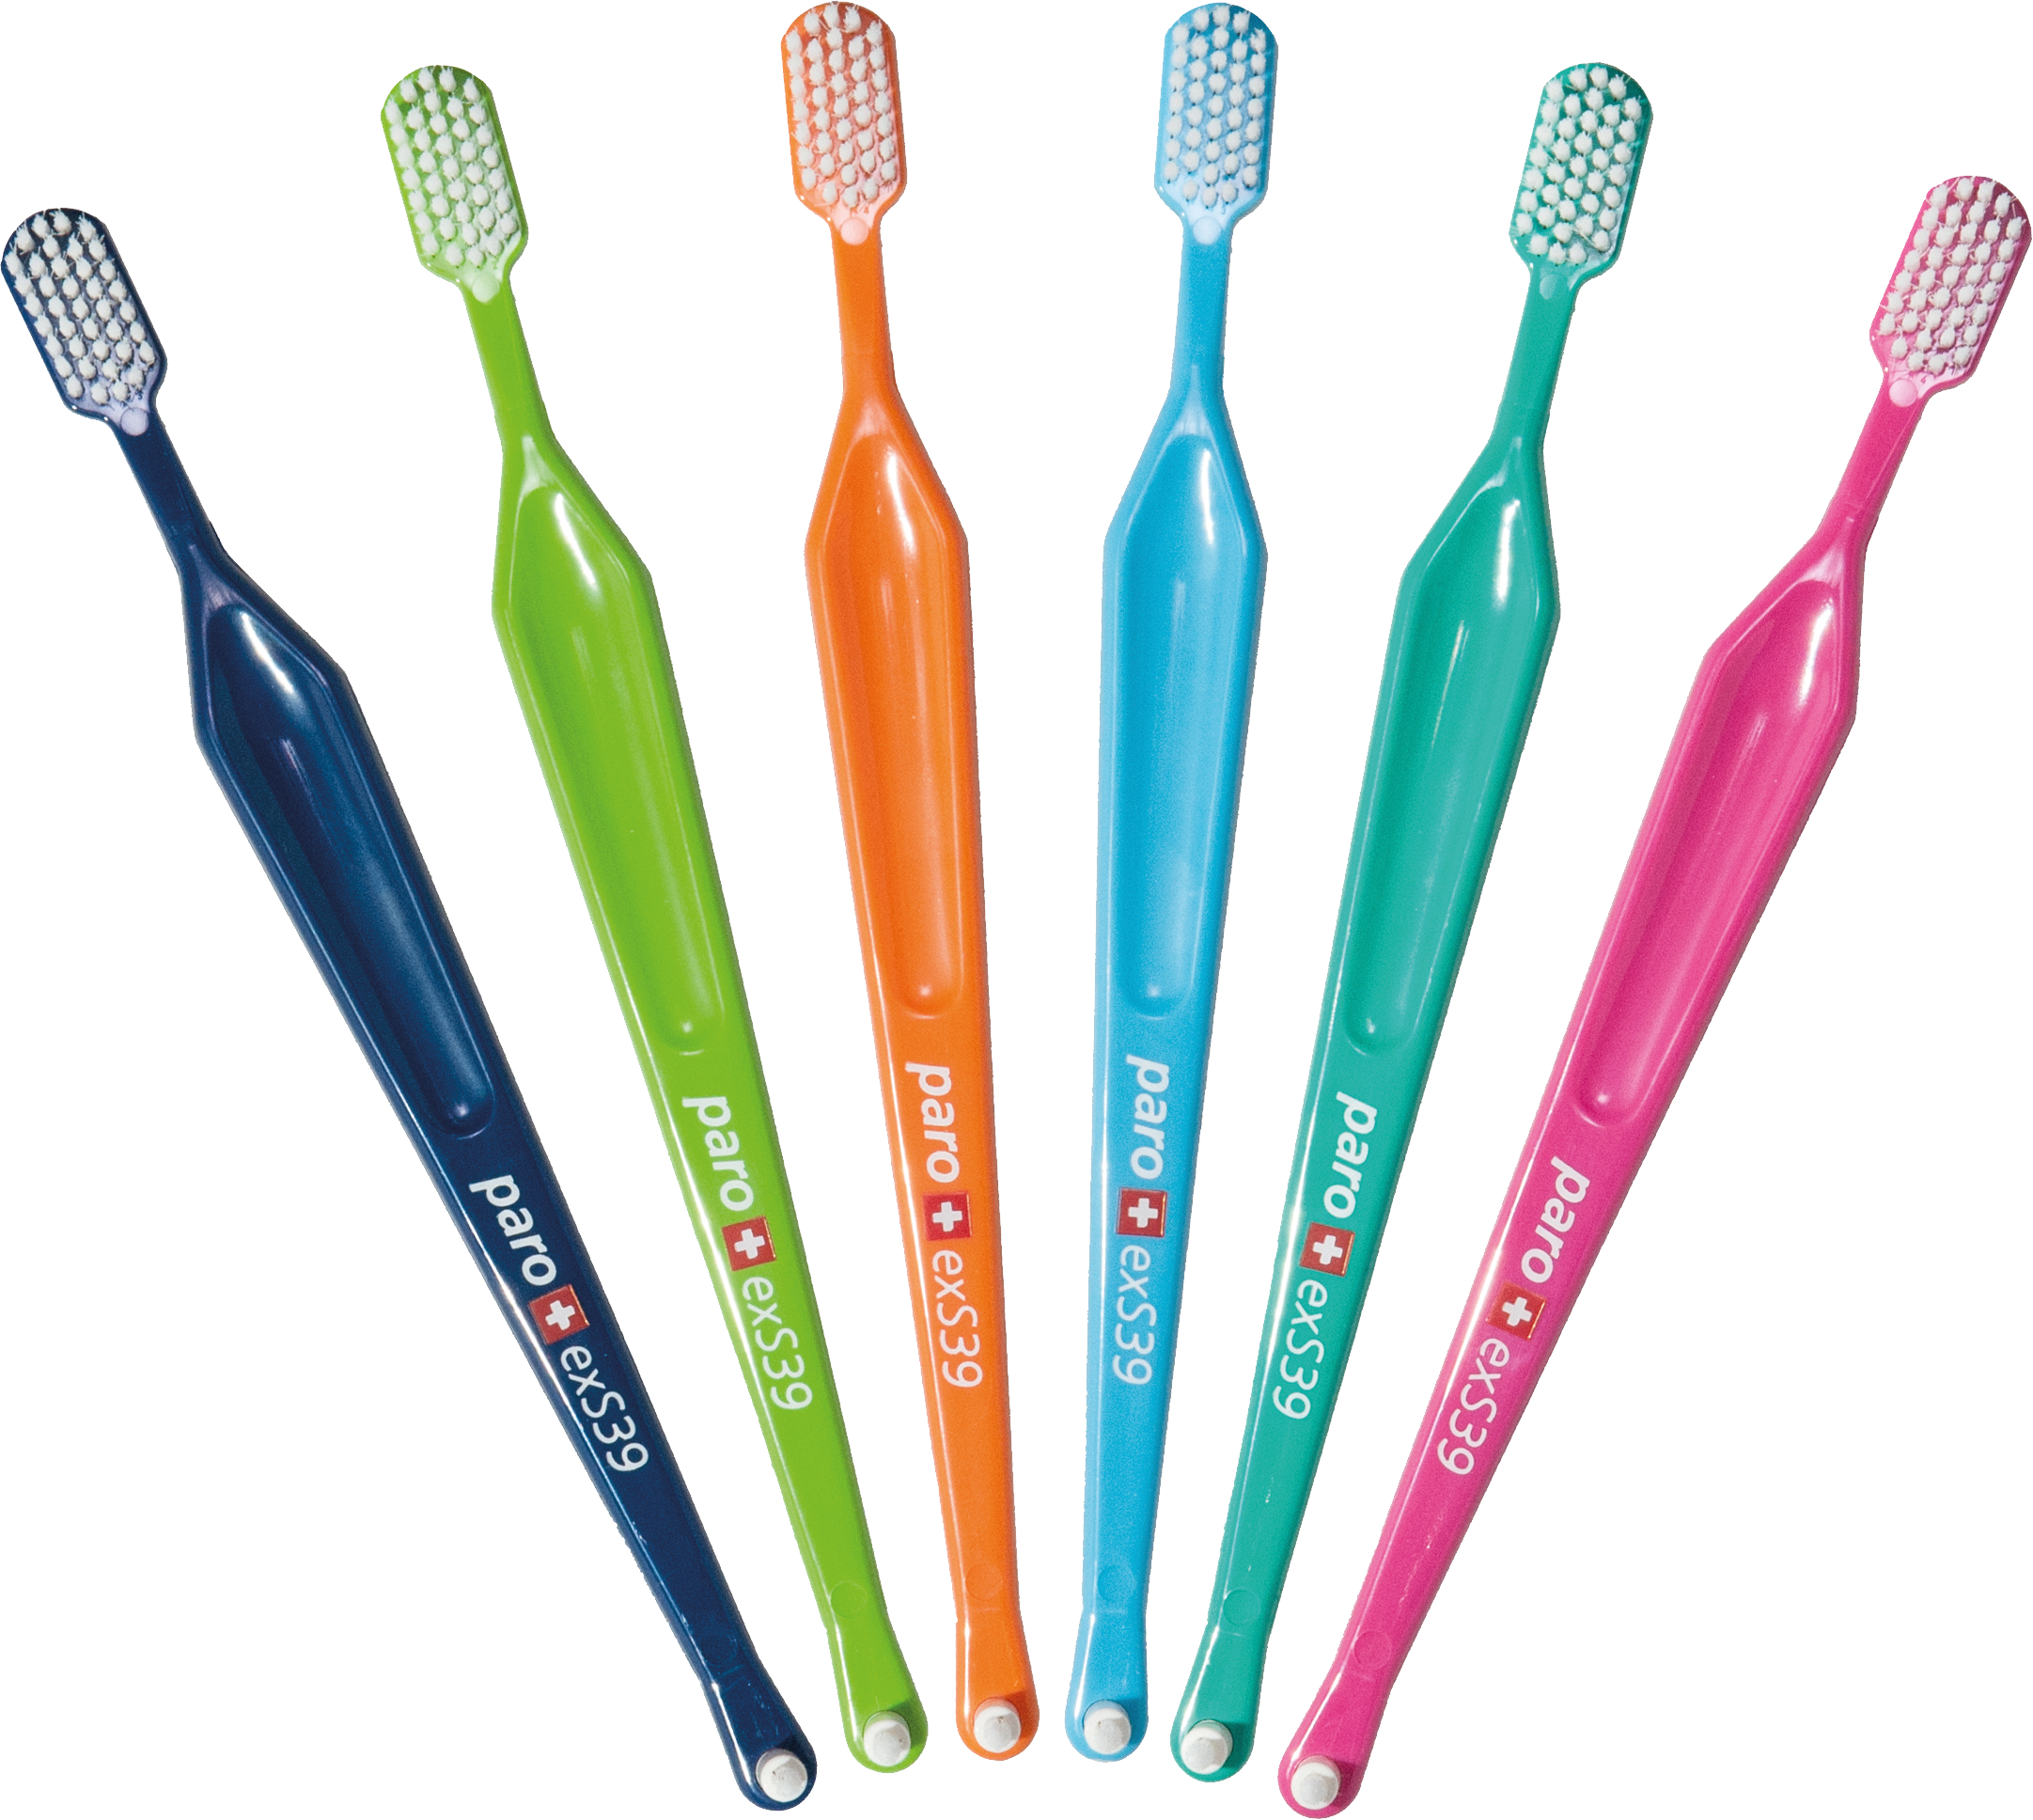 A Group Of Toothbrushes In Different Colors